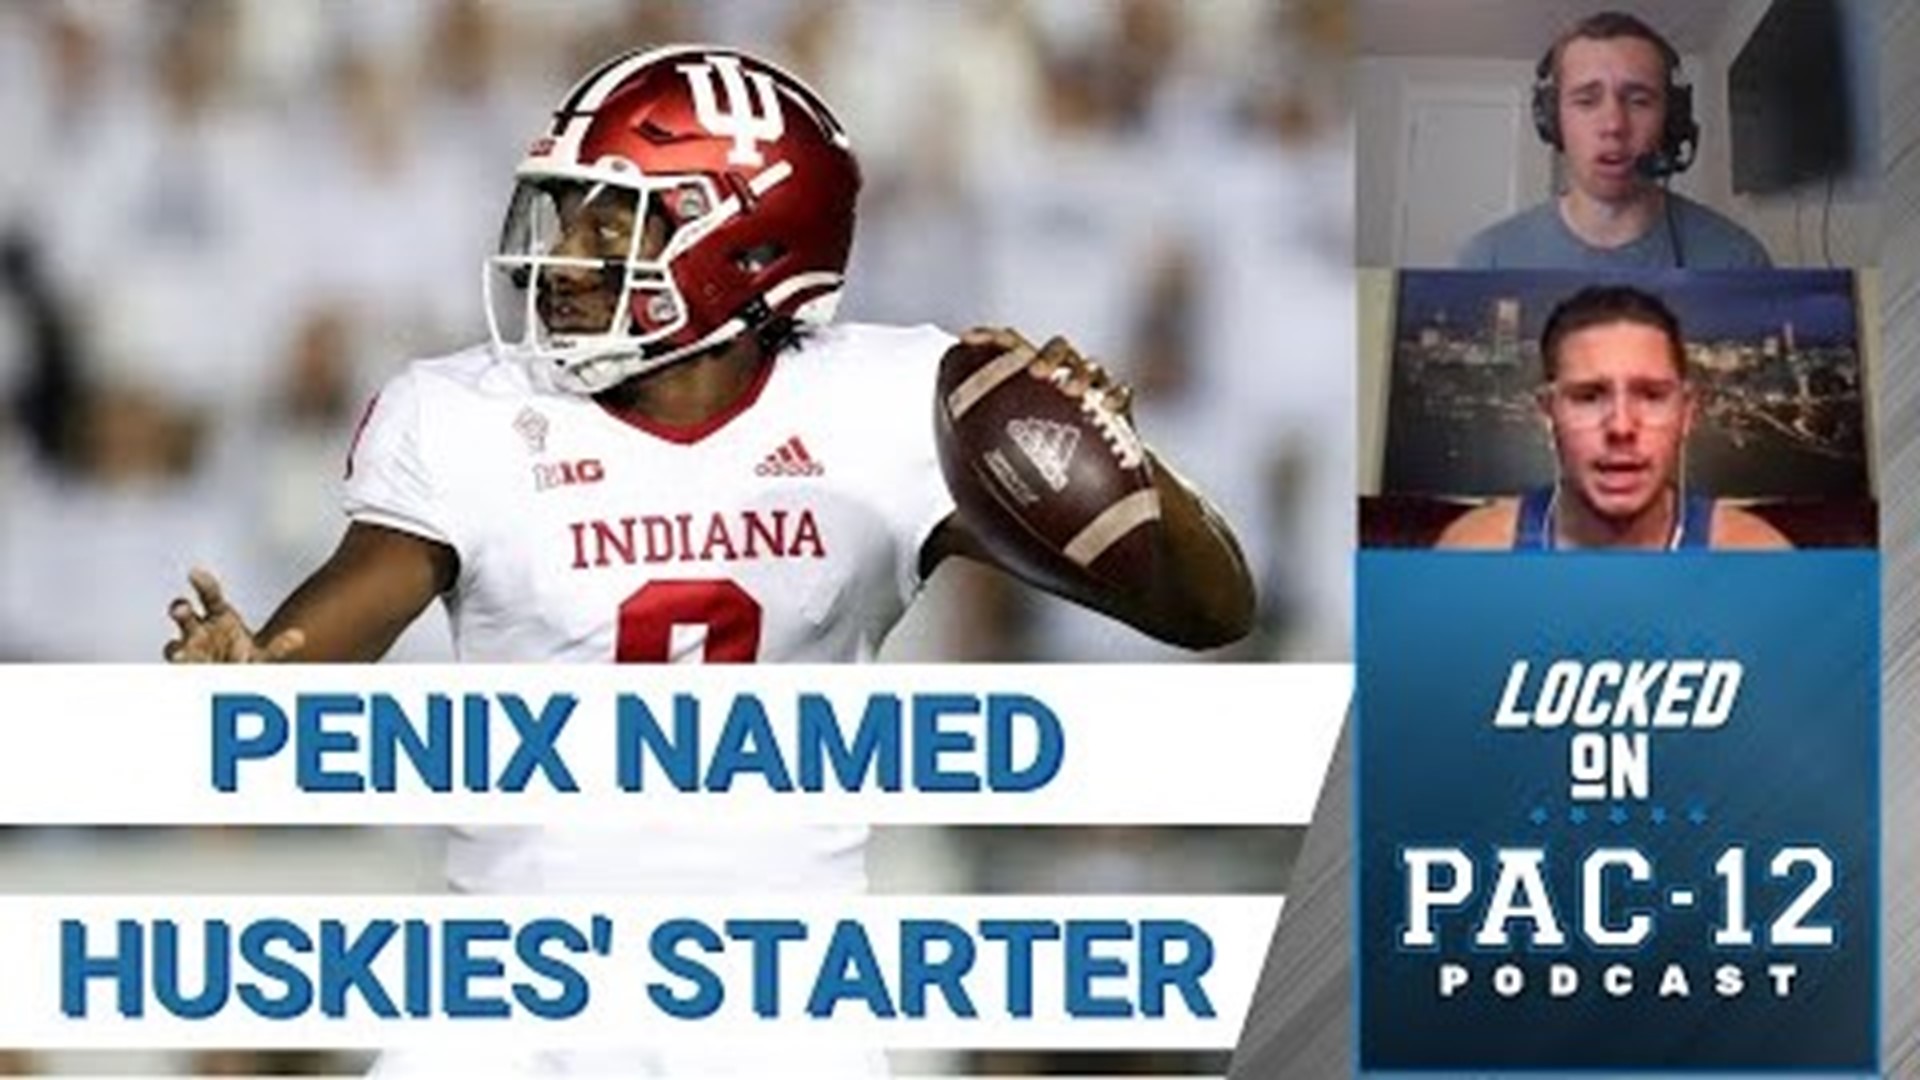 With three guys seemingly in the running to start, Washington has announced that Indiana transfer Michael Penix Jr. will be the starter for the Huskies.